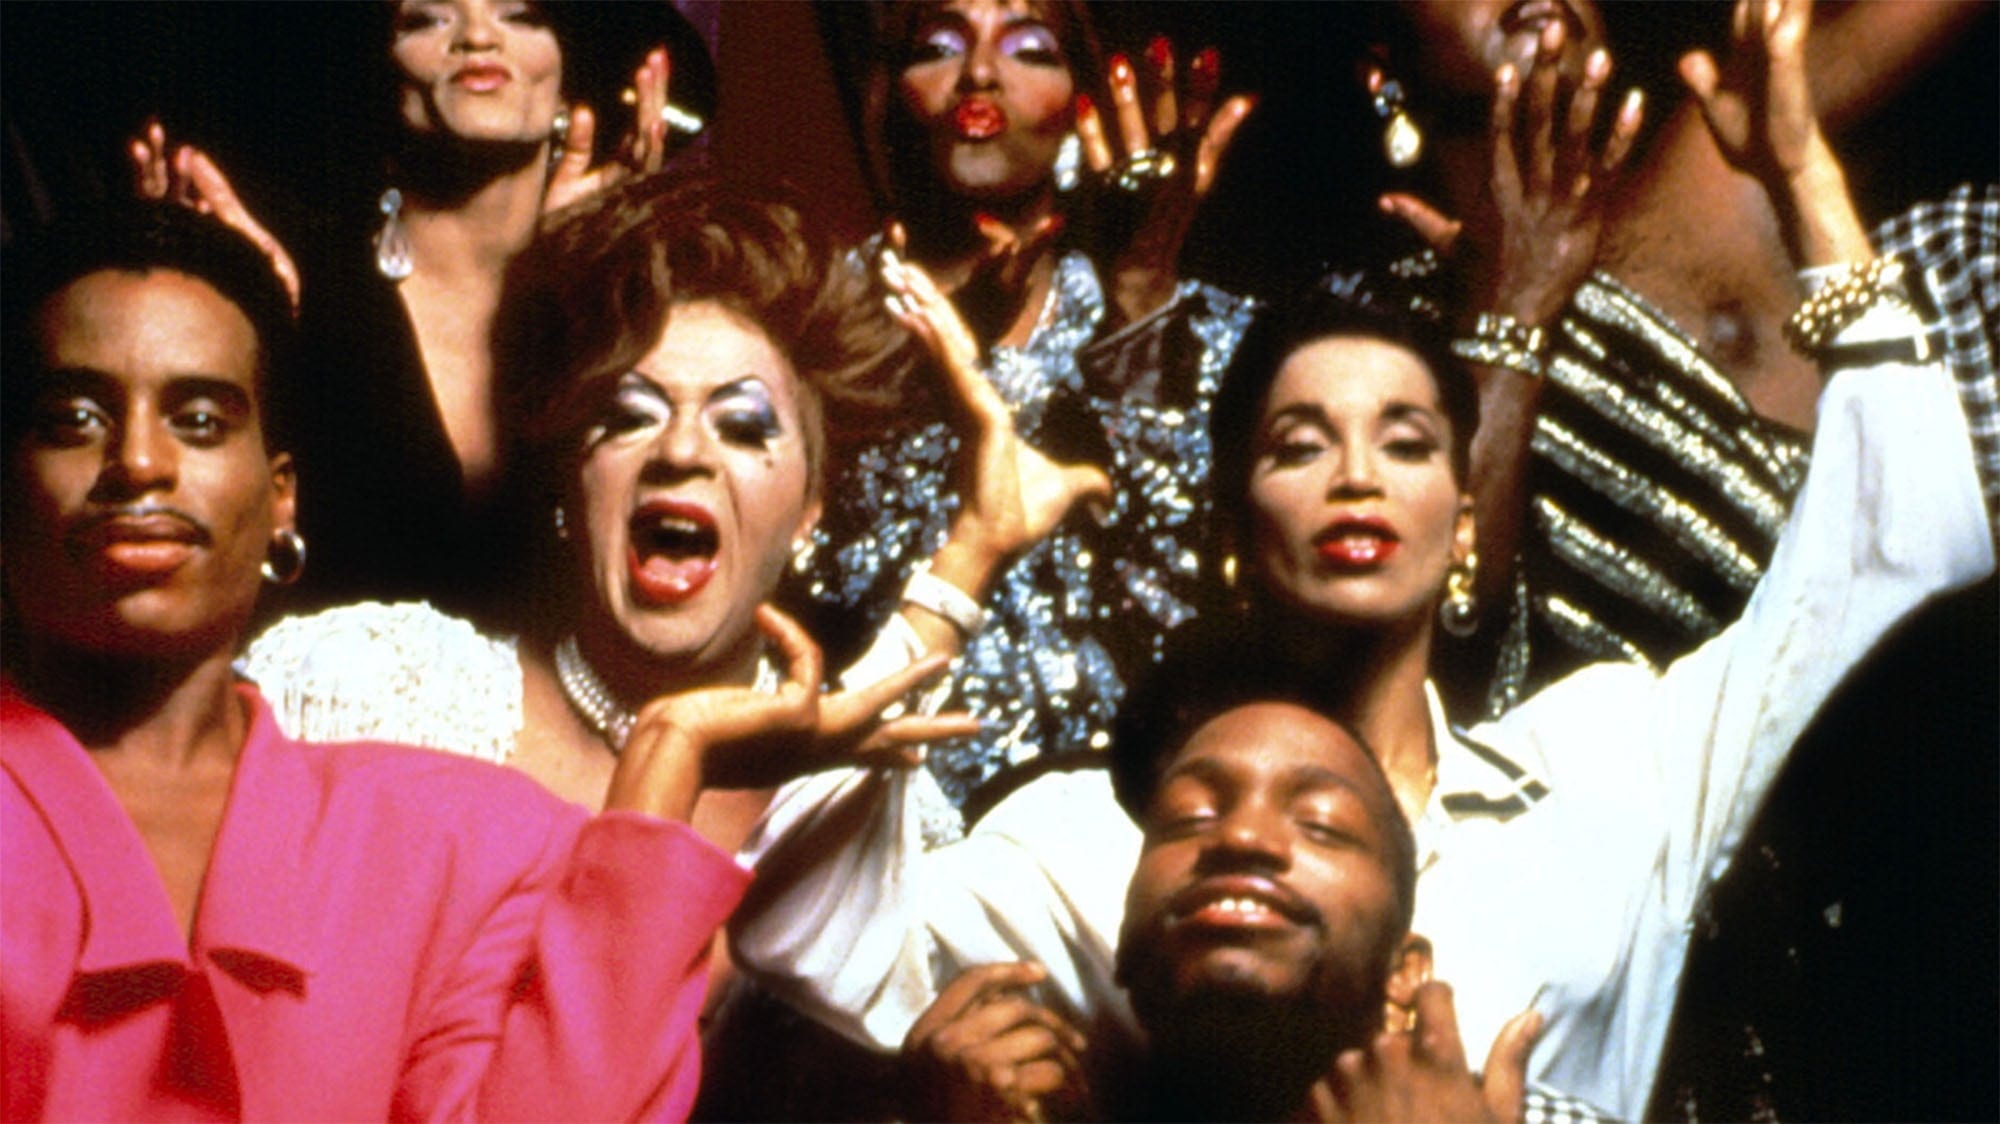 'Pose' owes its existence to the controversial documentary that first brought it to the attention of the mainstream: 'Paris is Burning' (1991).